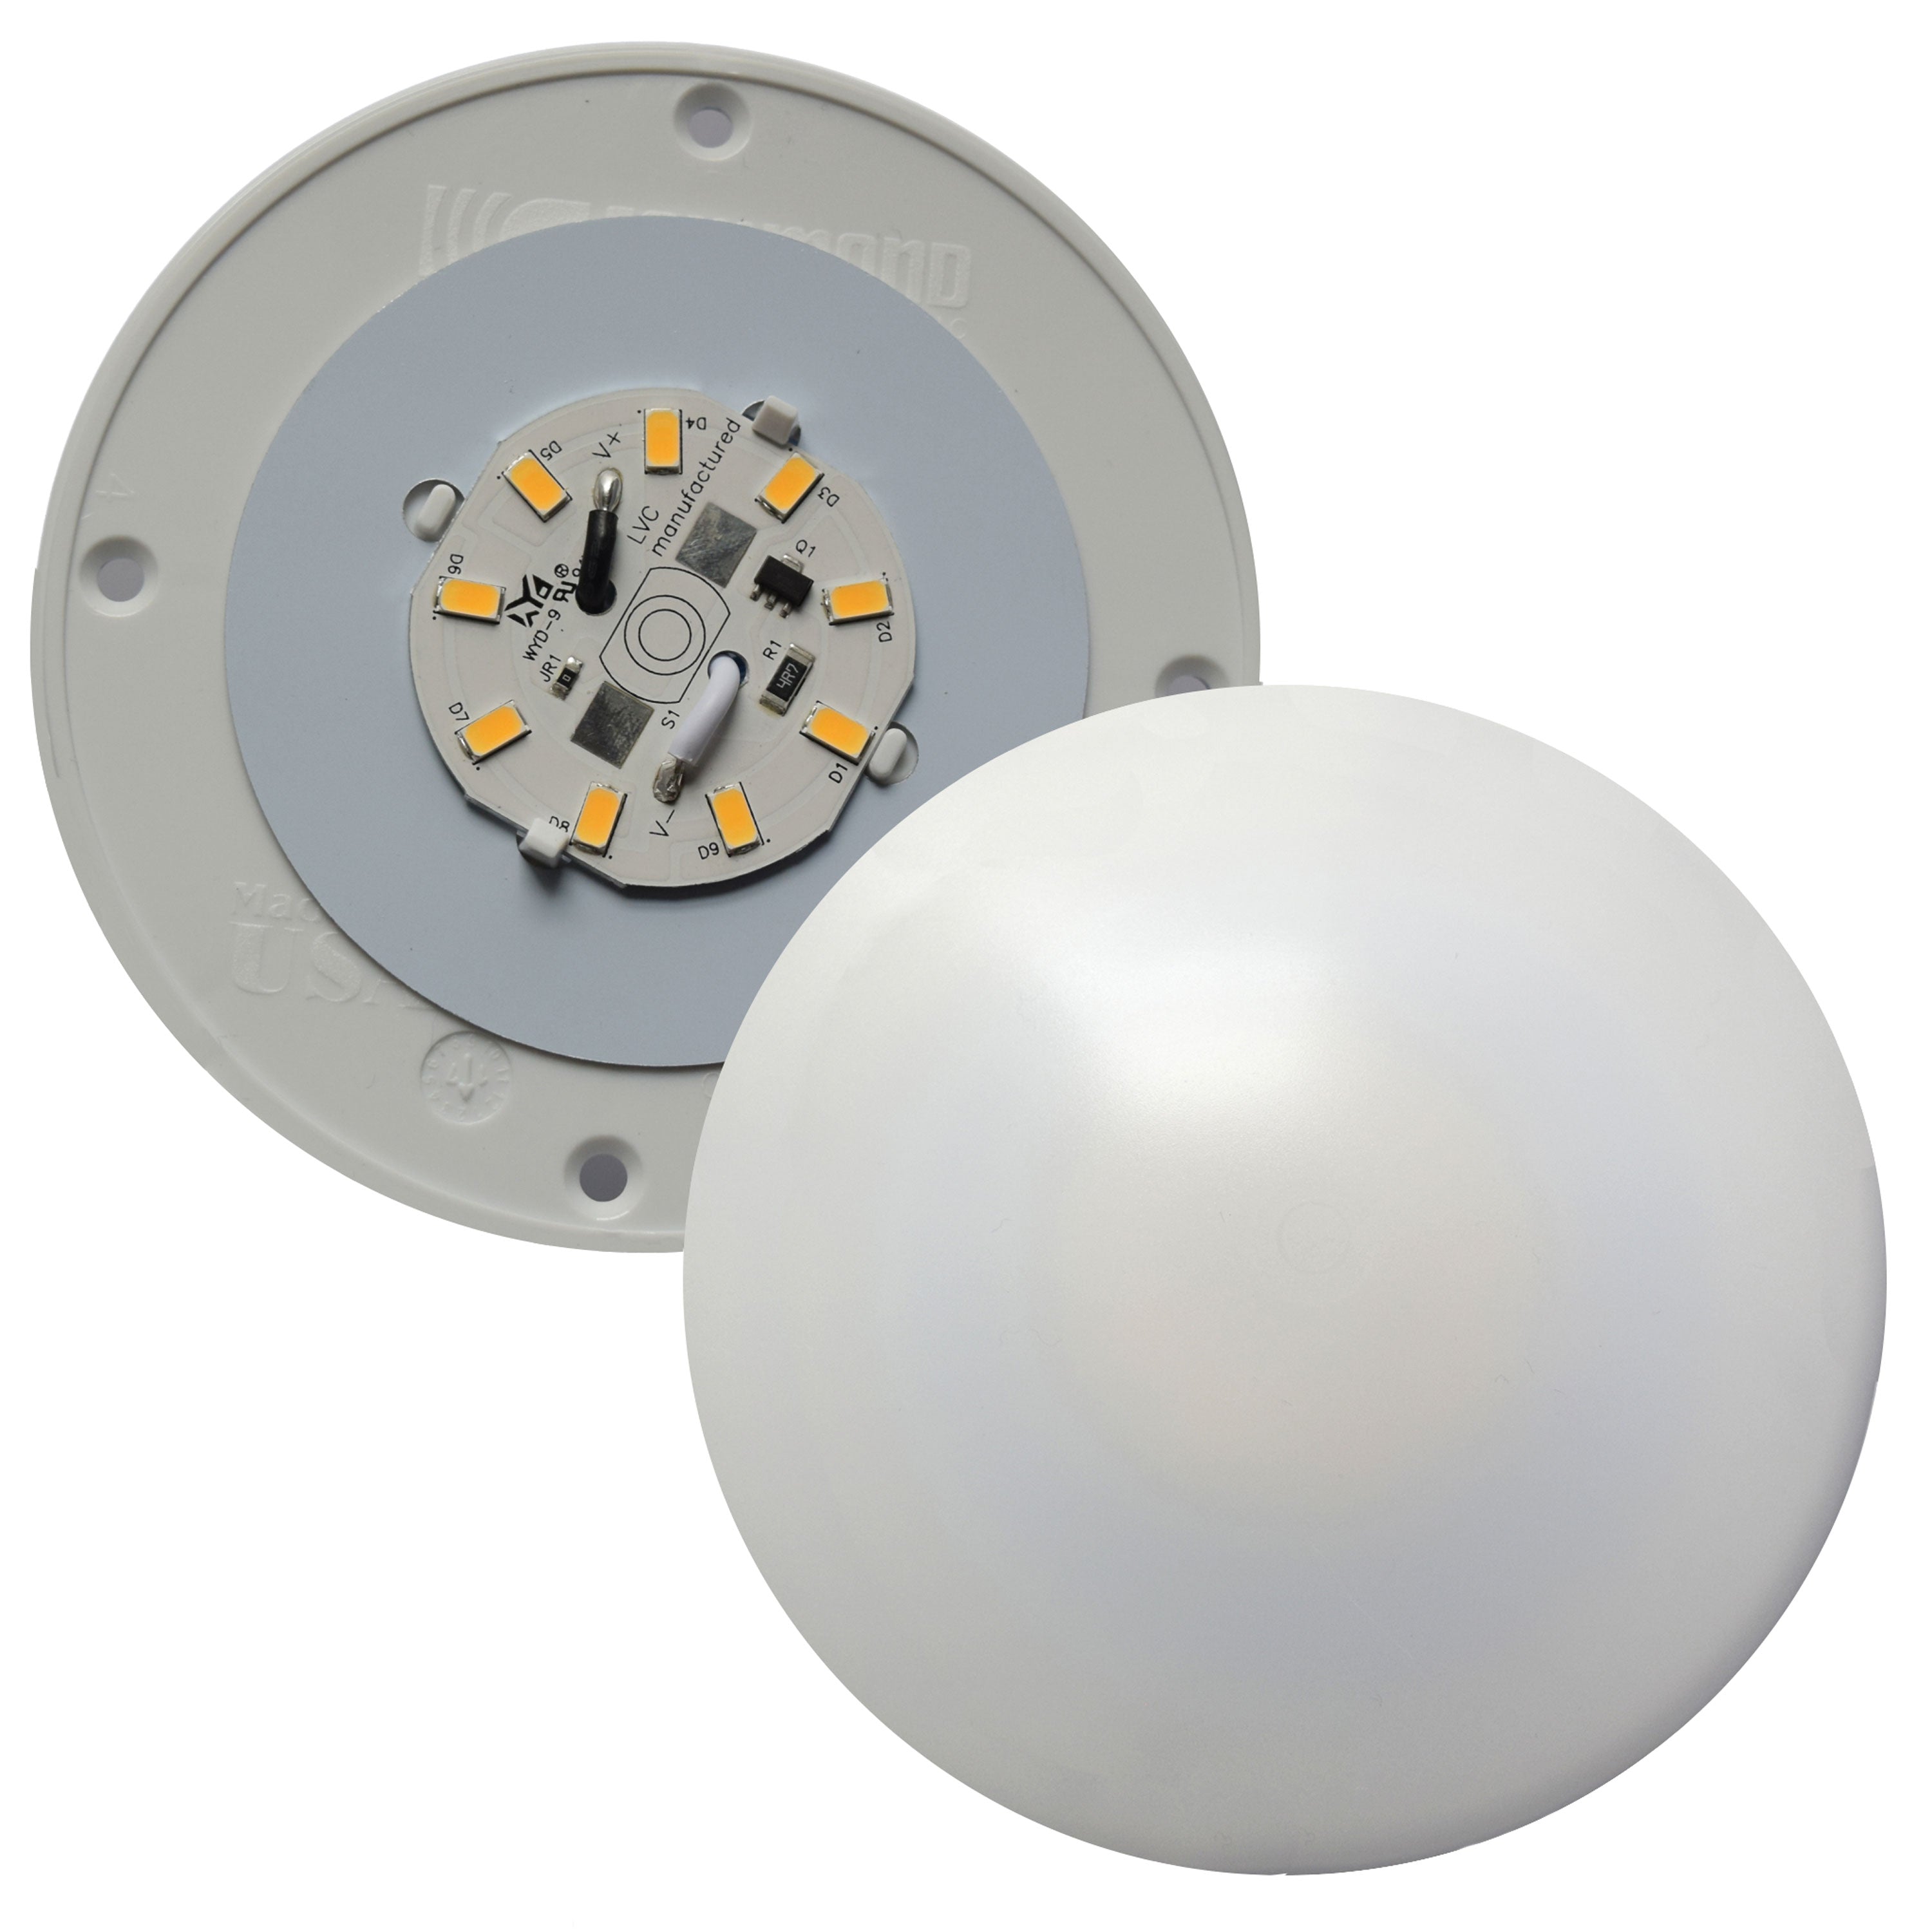 Fasteners Unlimited 001-1050 Surface Mount Round LED Ceiling Light - No Switch, 4.5" Diameter x 0.75" Height